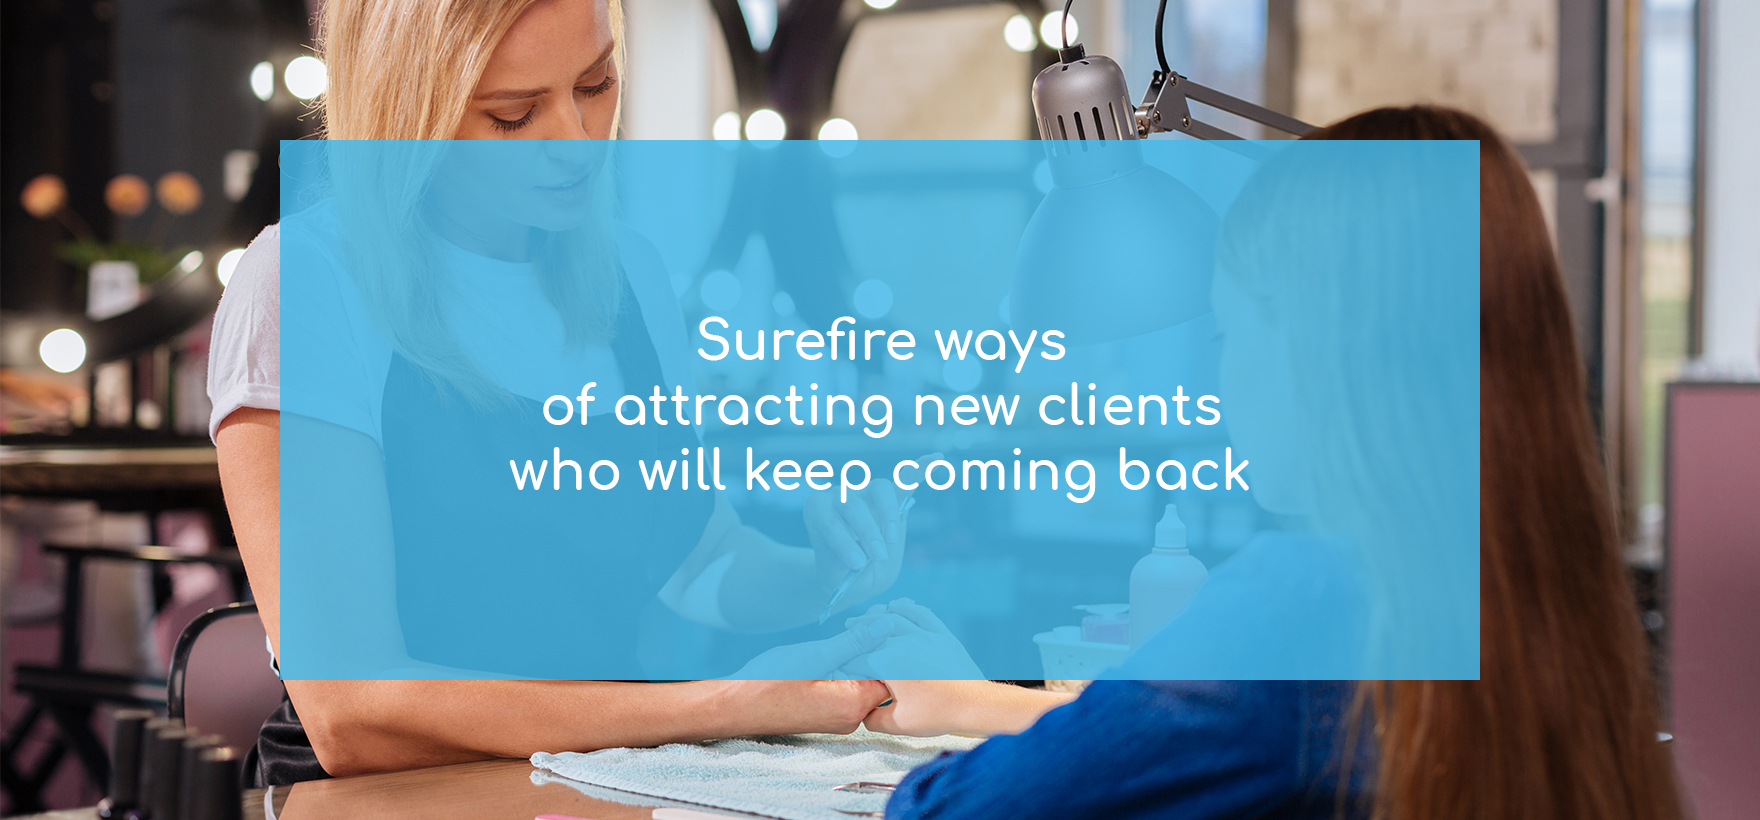 How to get more clients in a salon. 6 surefire ways of attracting new clients who will keep coming back